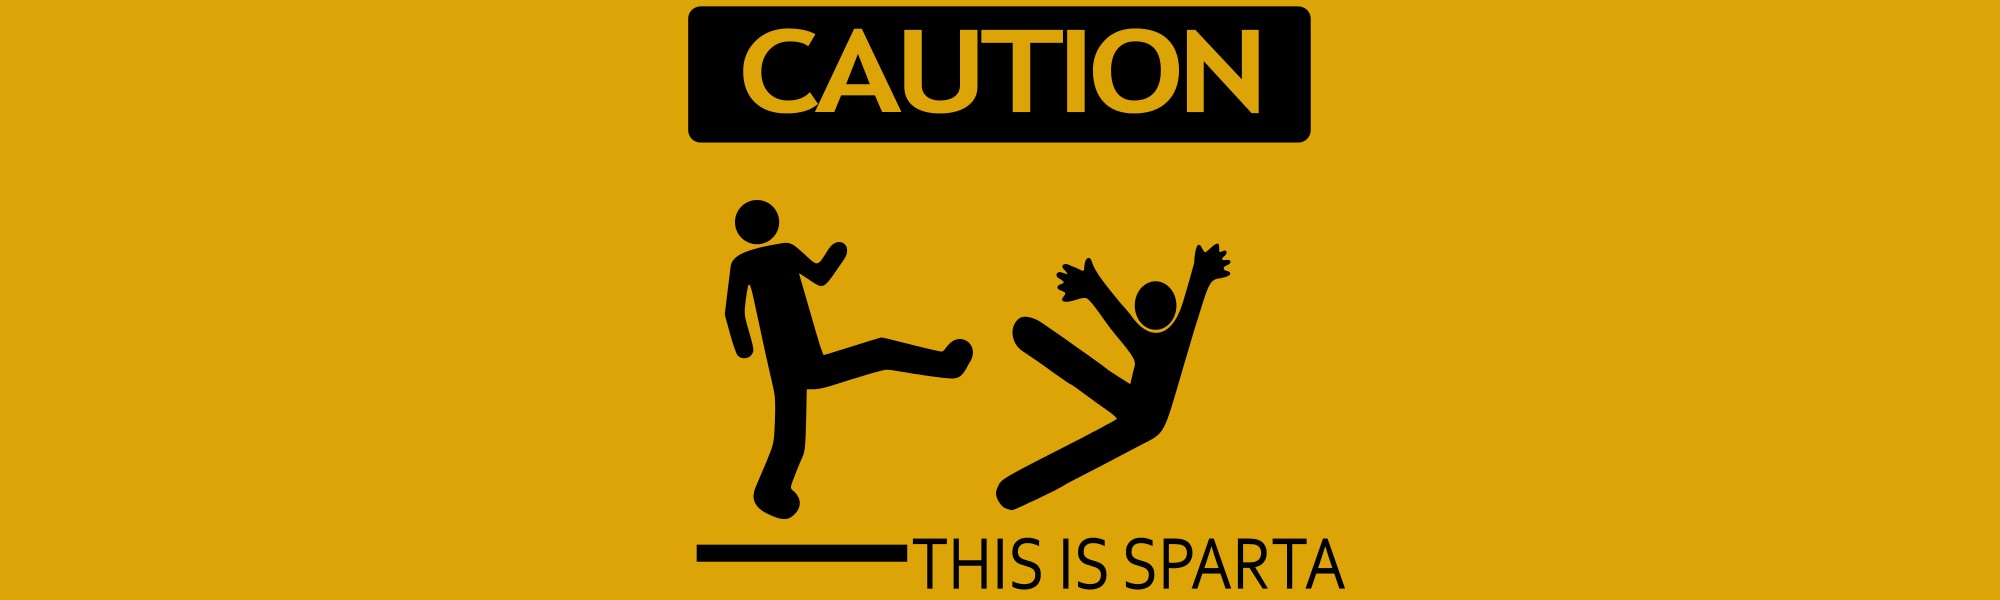 This is Sparta